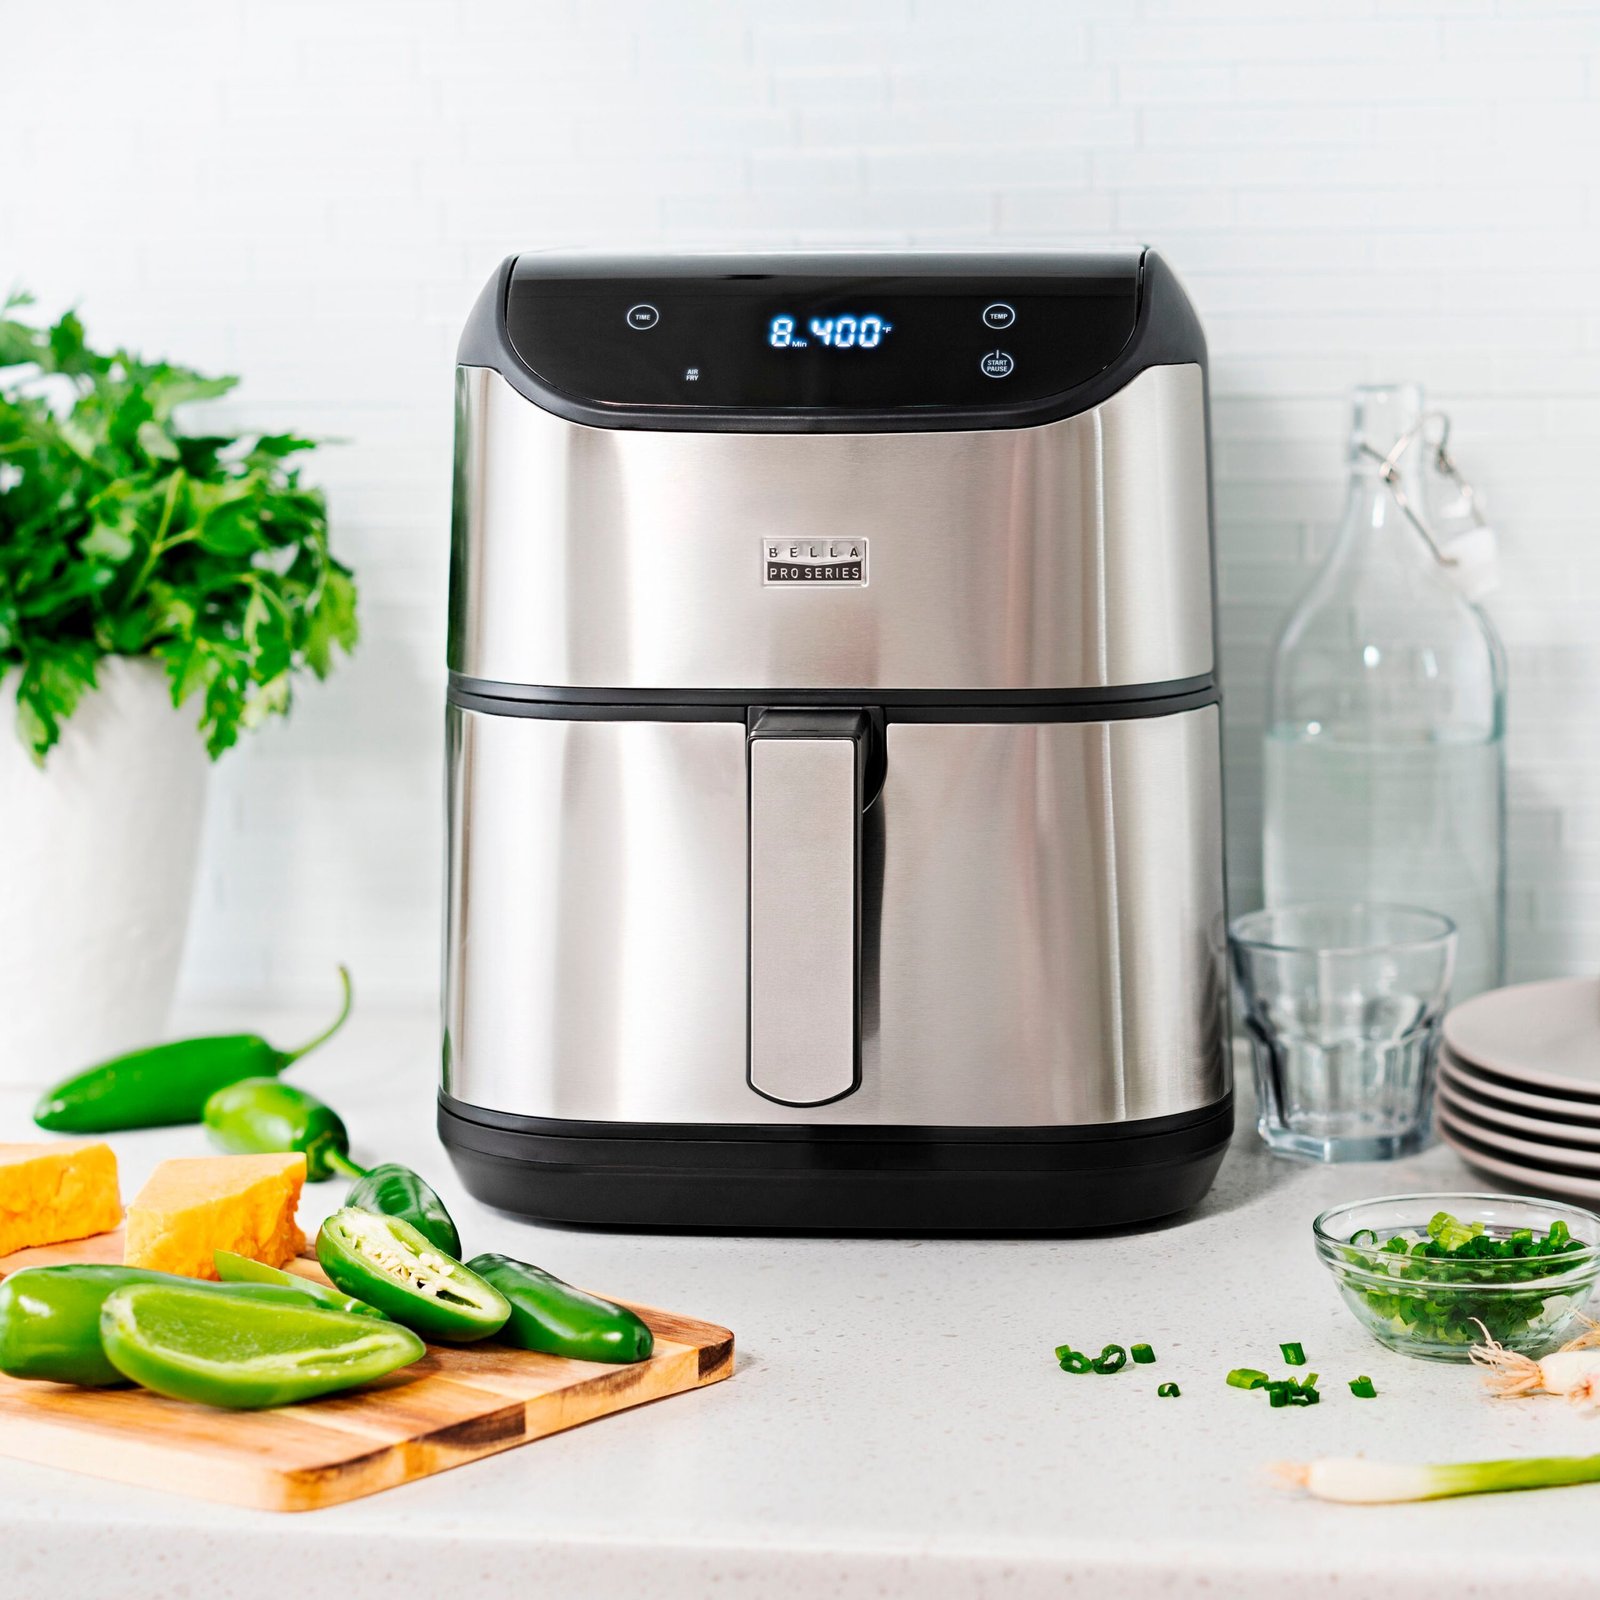 https://themarketdepot.com/wp-content/uploads/2023/01/Bella-Pro-Series-6-qt.-Digital-Air-Fryer-with-Stainless-Finish-Stainless-Steel-11-scaled-1.jpg